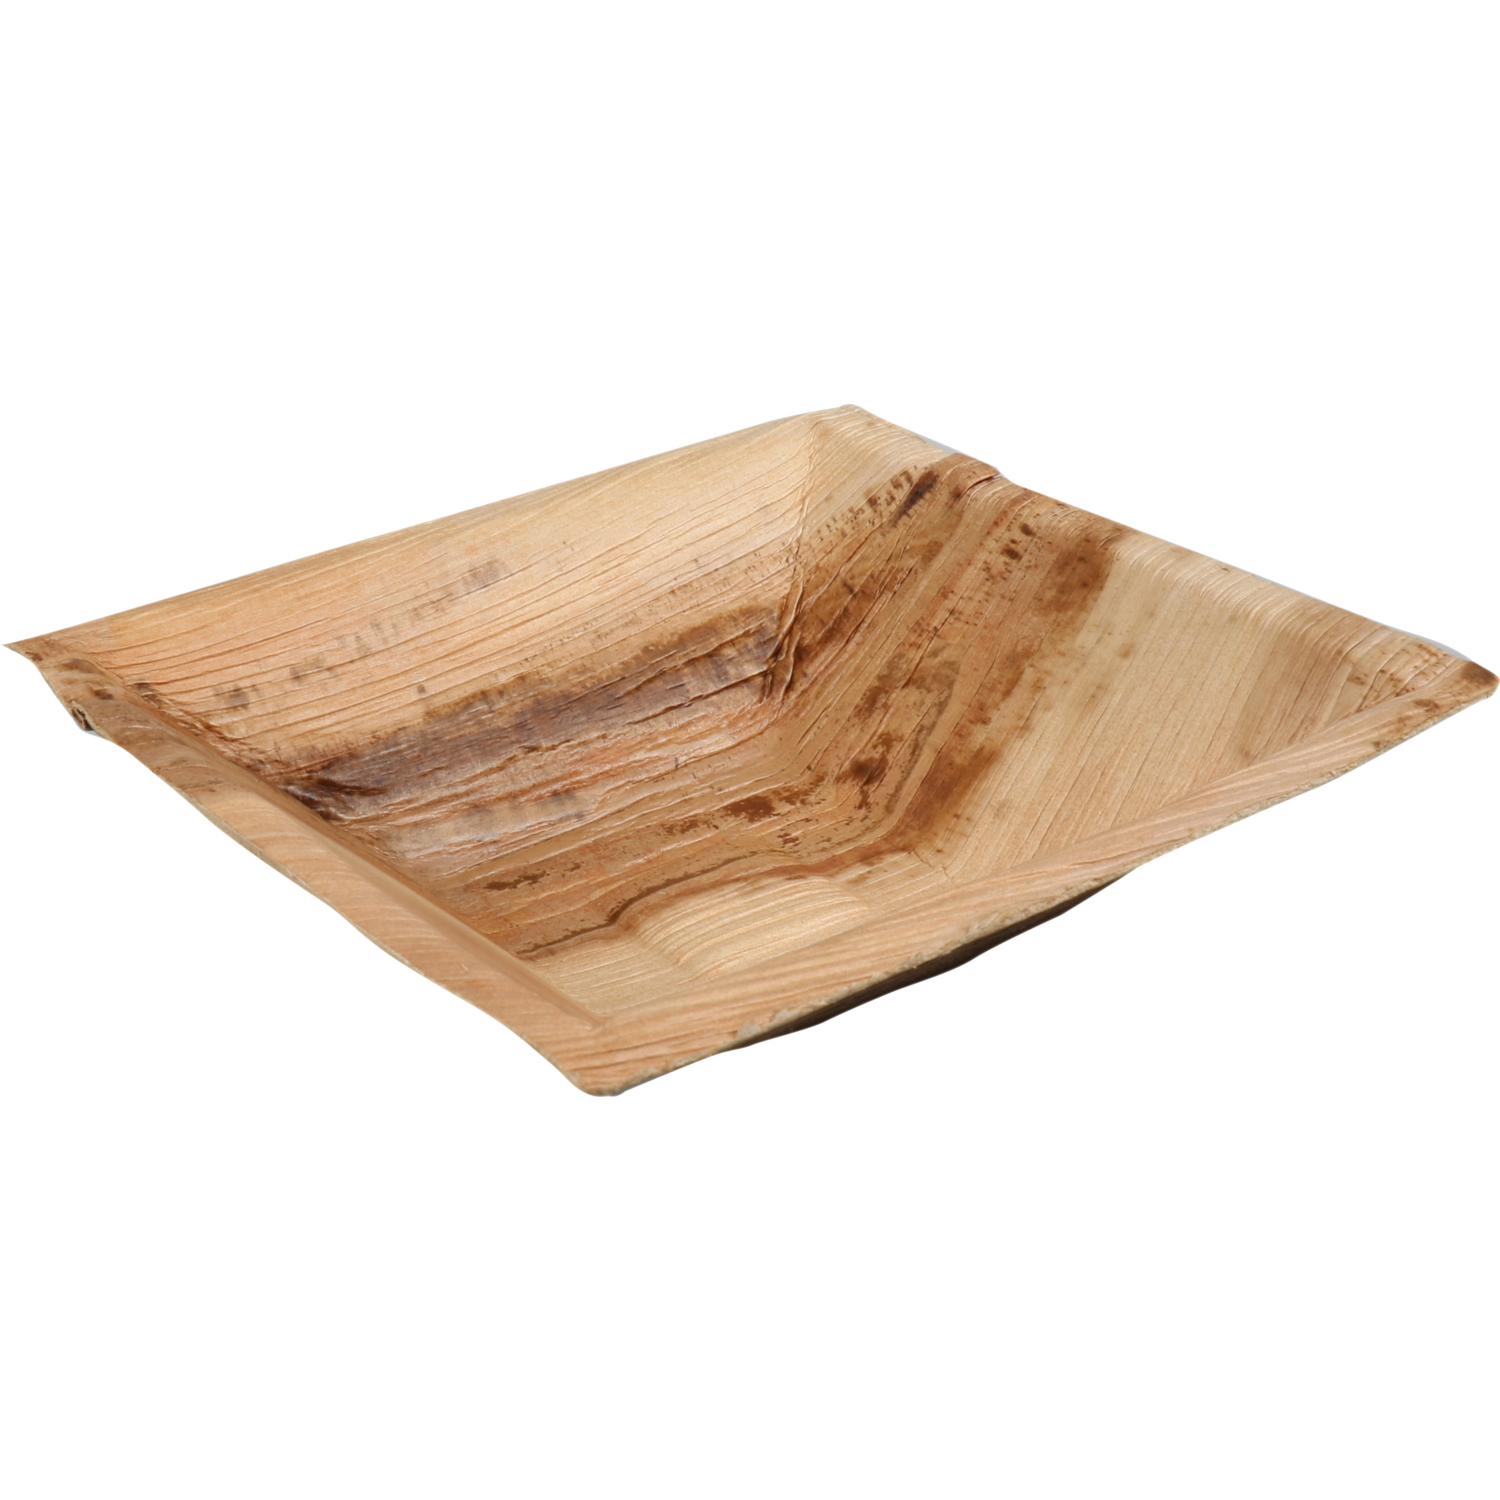 Biodore Bowl, palm frond, 160x160x45mm, natural 1